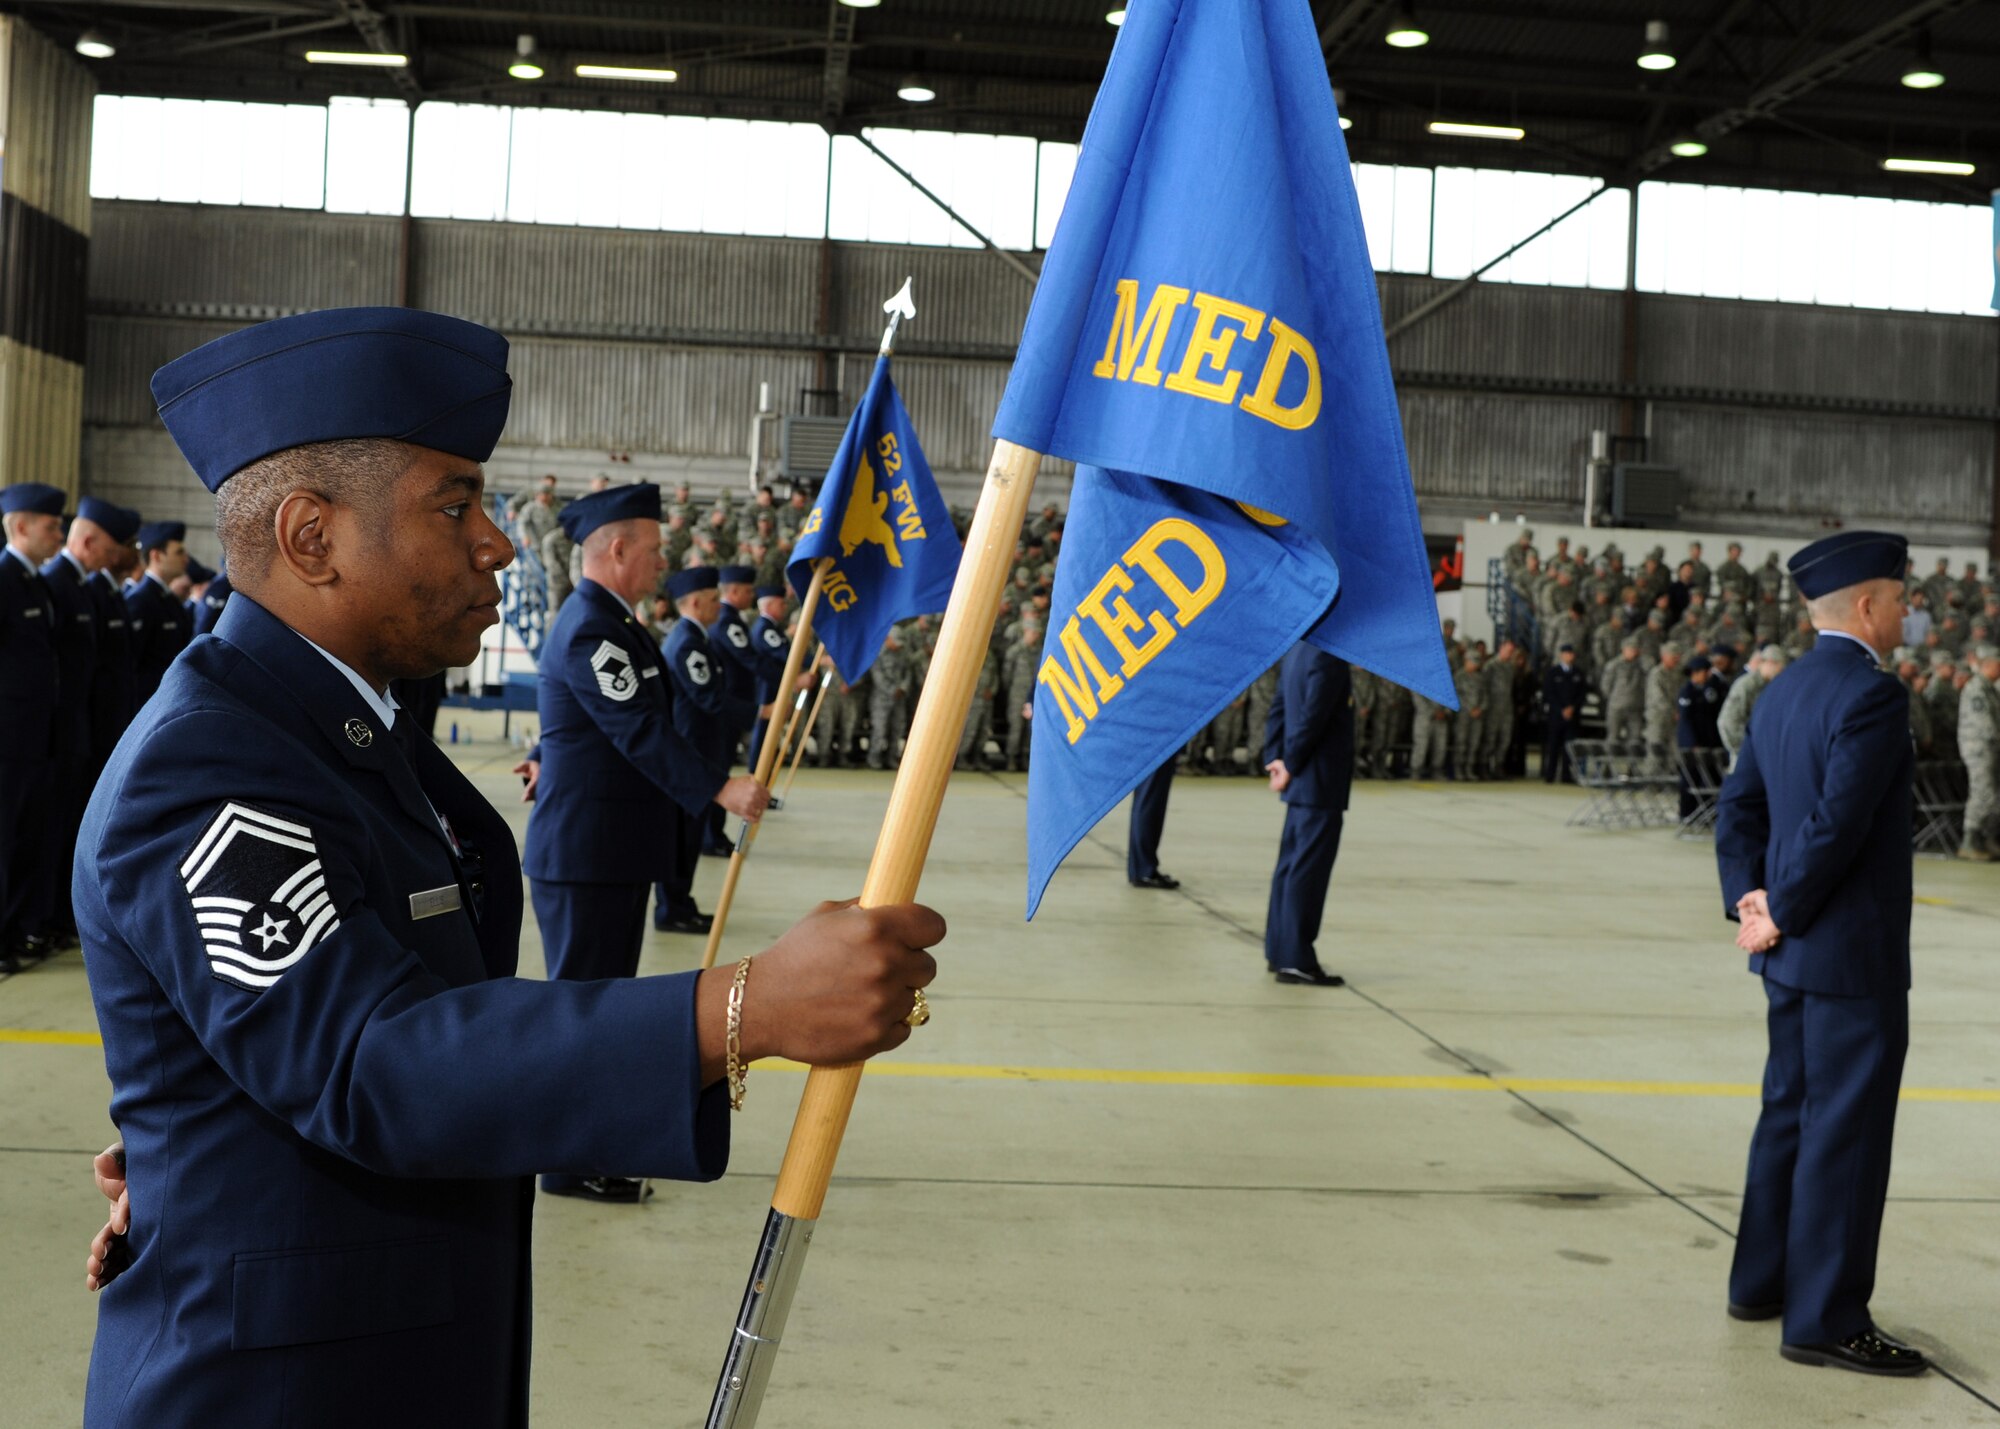 U.S. Air Force Senior Master Sgt. Paul Ellis, 52nd Medical Group acting superintendent, holds the group’s guidon during the 52nd Fighter Wing assumption of command ceremony in Hangar 1 at Spangdahlem Air Base, Germany, July 11, 2014. More than 500 Saber Airmen attended the ceremony where U.S. Air Force Col. Peter Bilodeau assumed command of the wing. (U.S. Air Force photo by Airman 1st Class Dylan Nuckolls/Released)